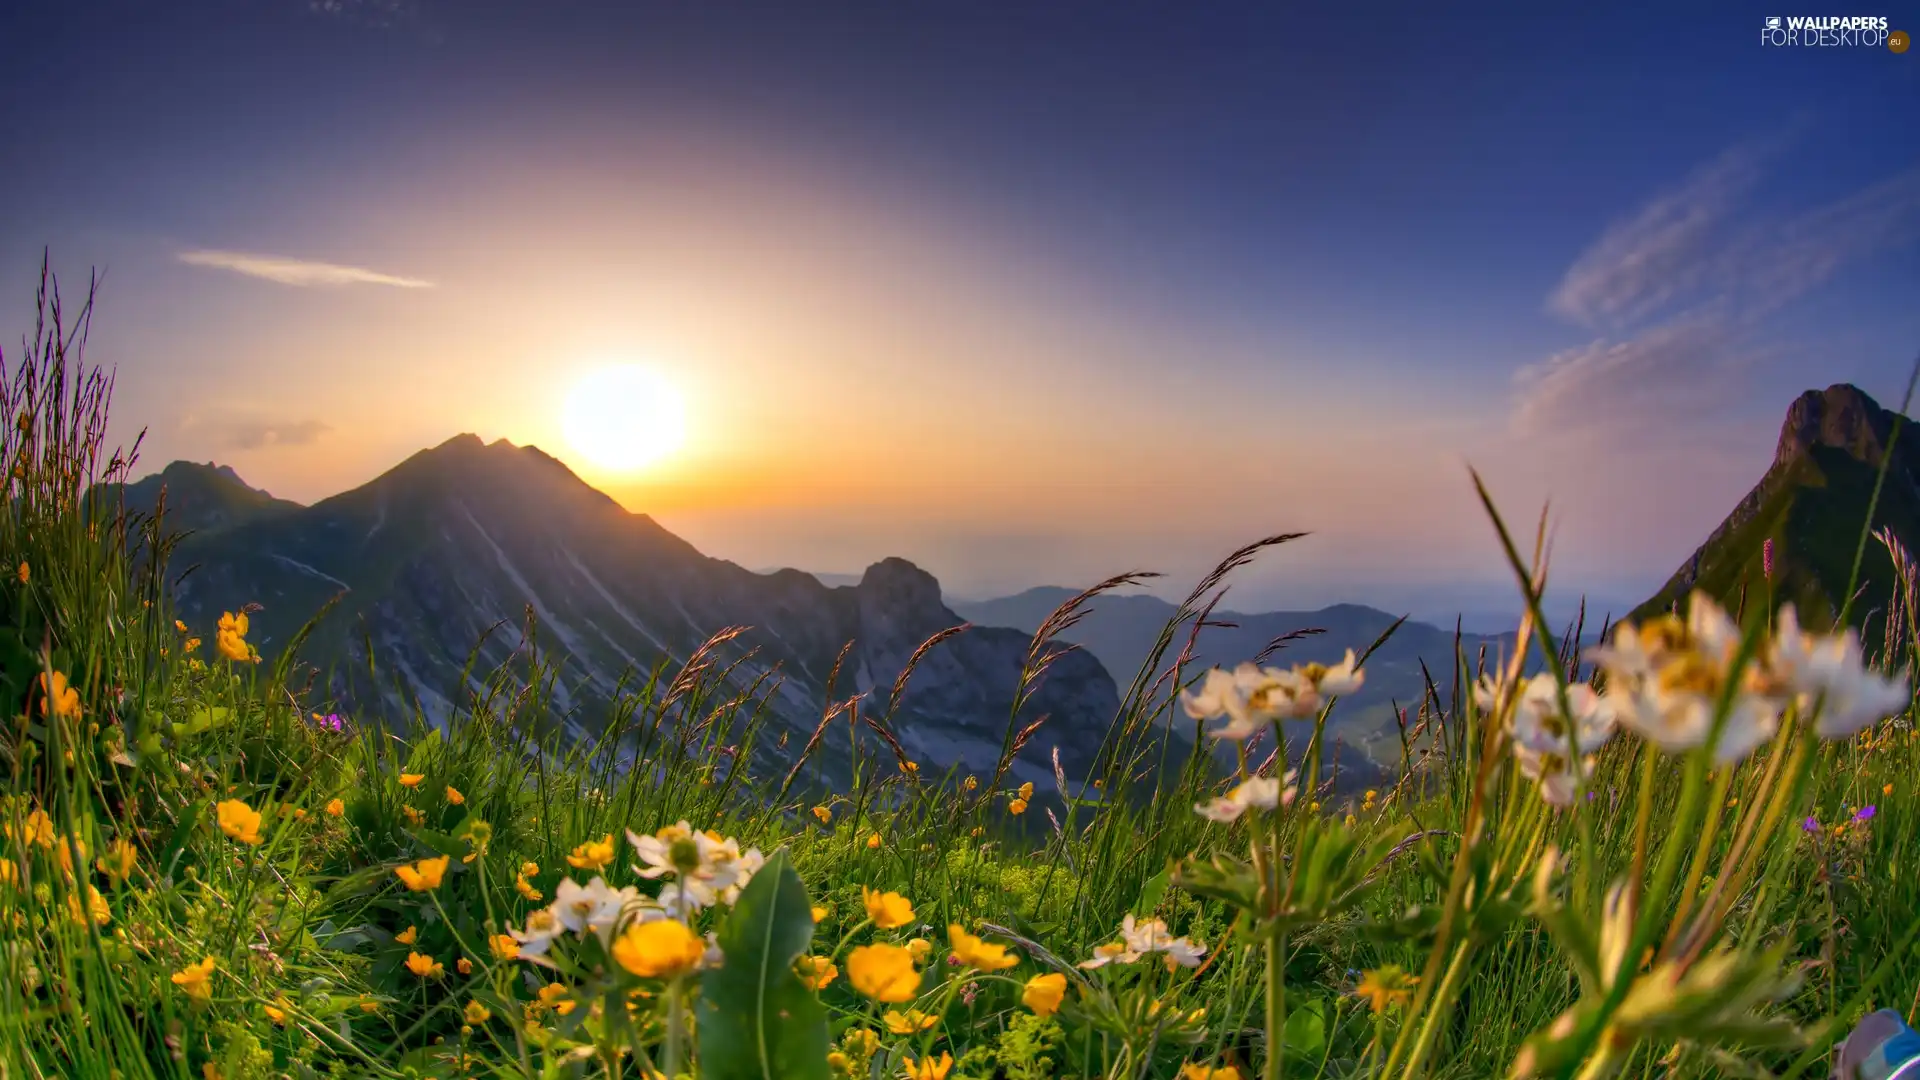 Sunrise, Spring, Meadow, Flowers, Mountains